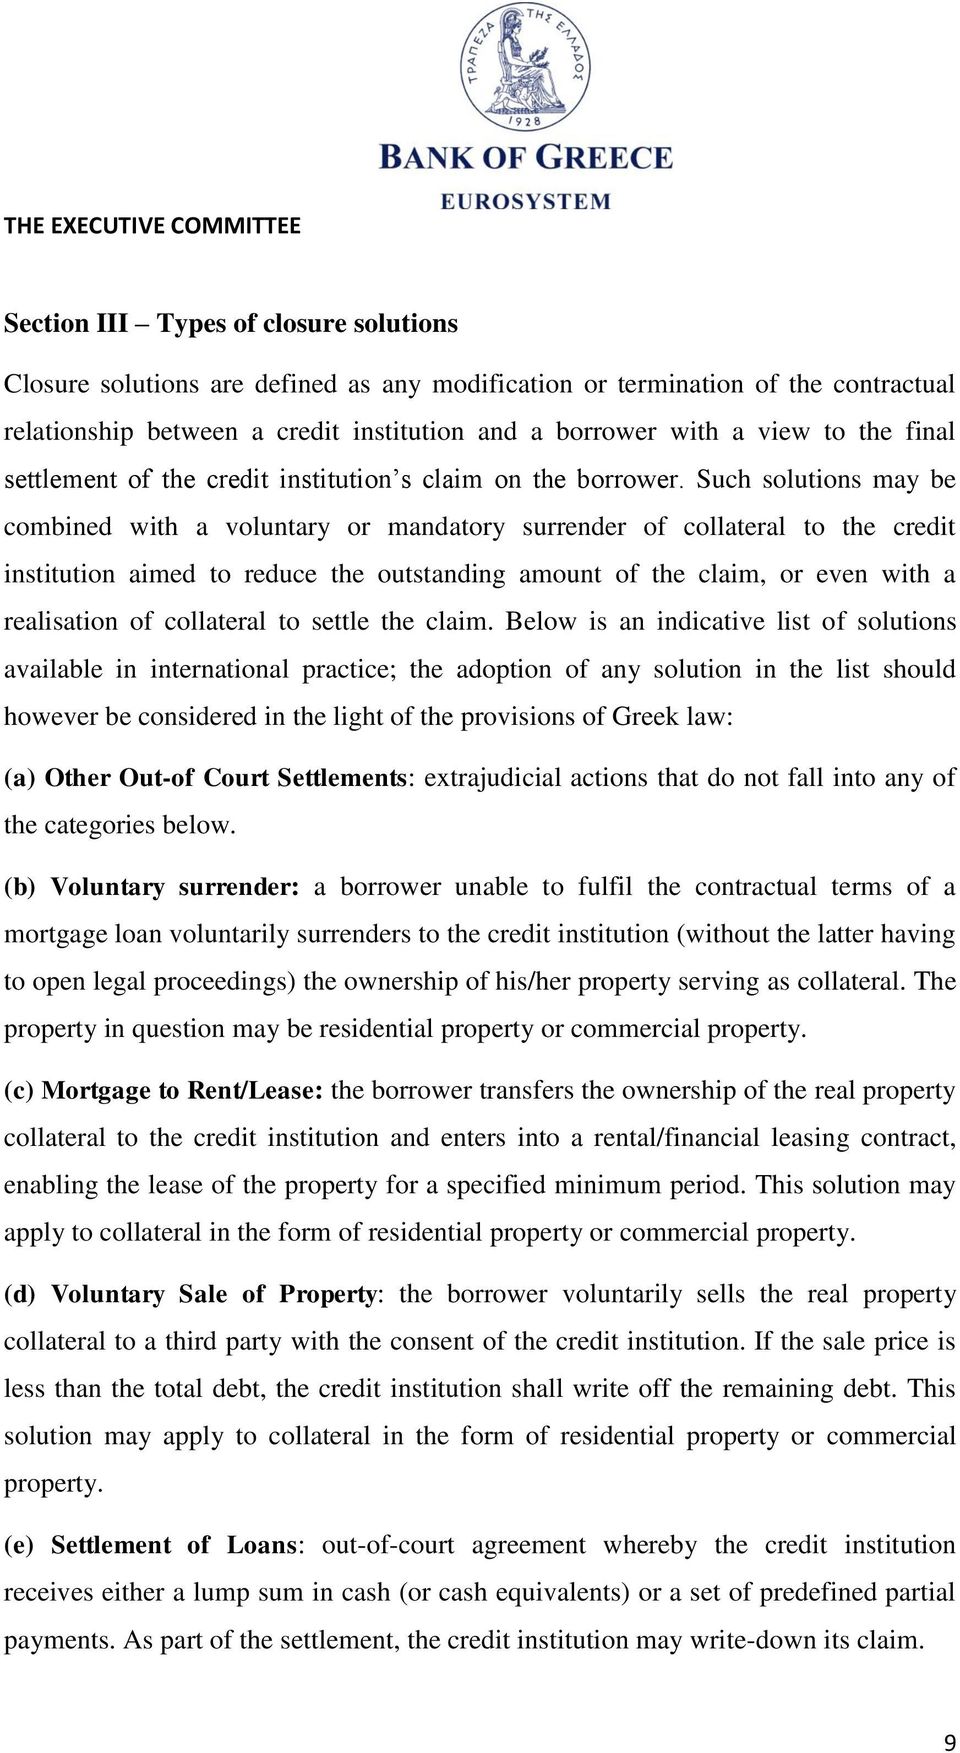 Such solutions may be combined a voluntary or mandatory surrender of collateral to the credit institution aimed to reduce the outstanding amount of the claim, or even a realisation of collateral to